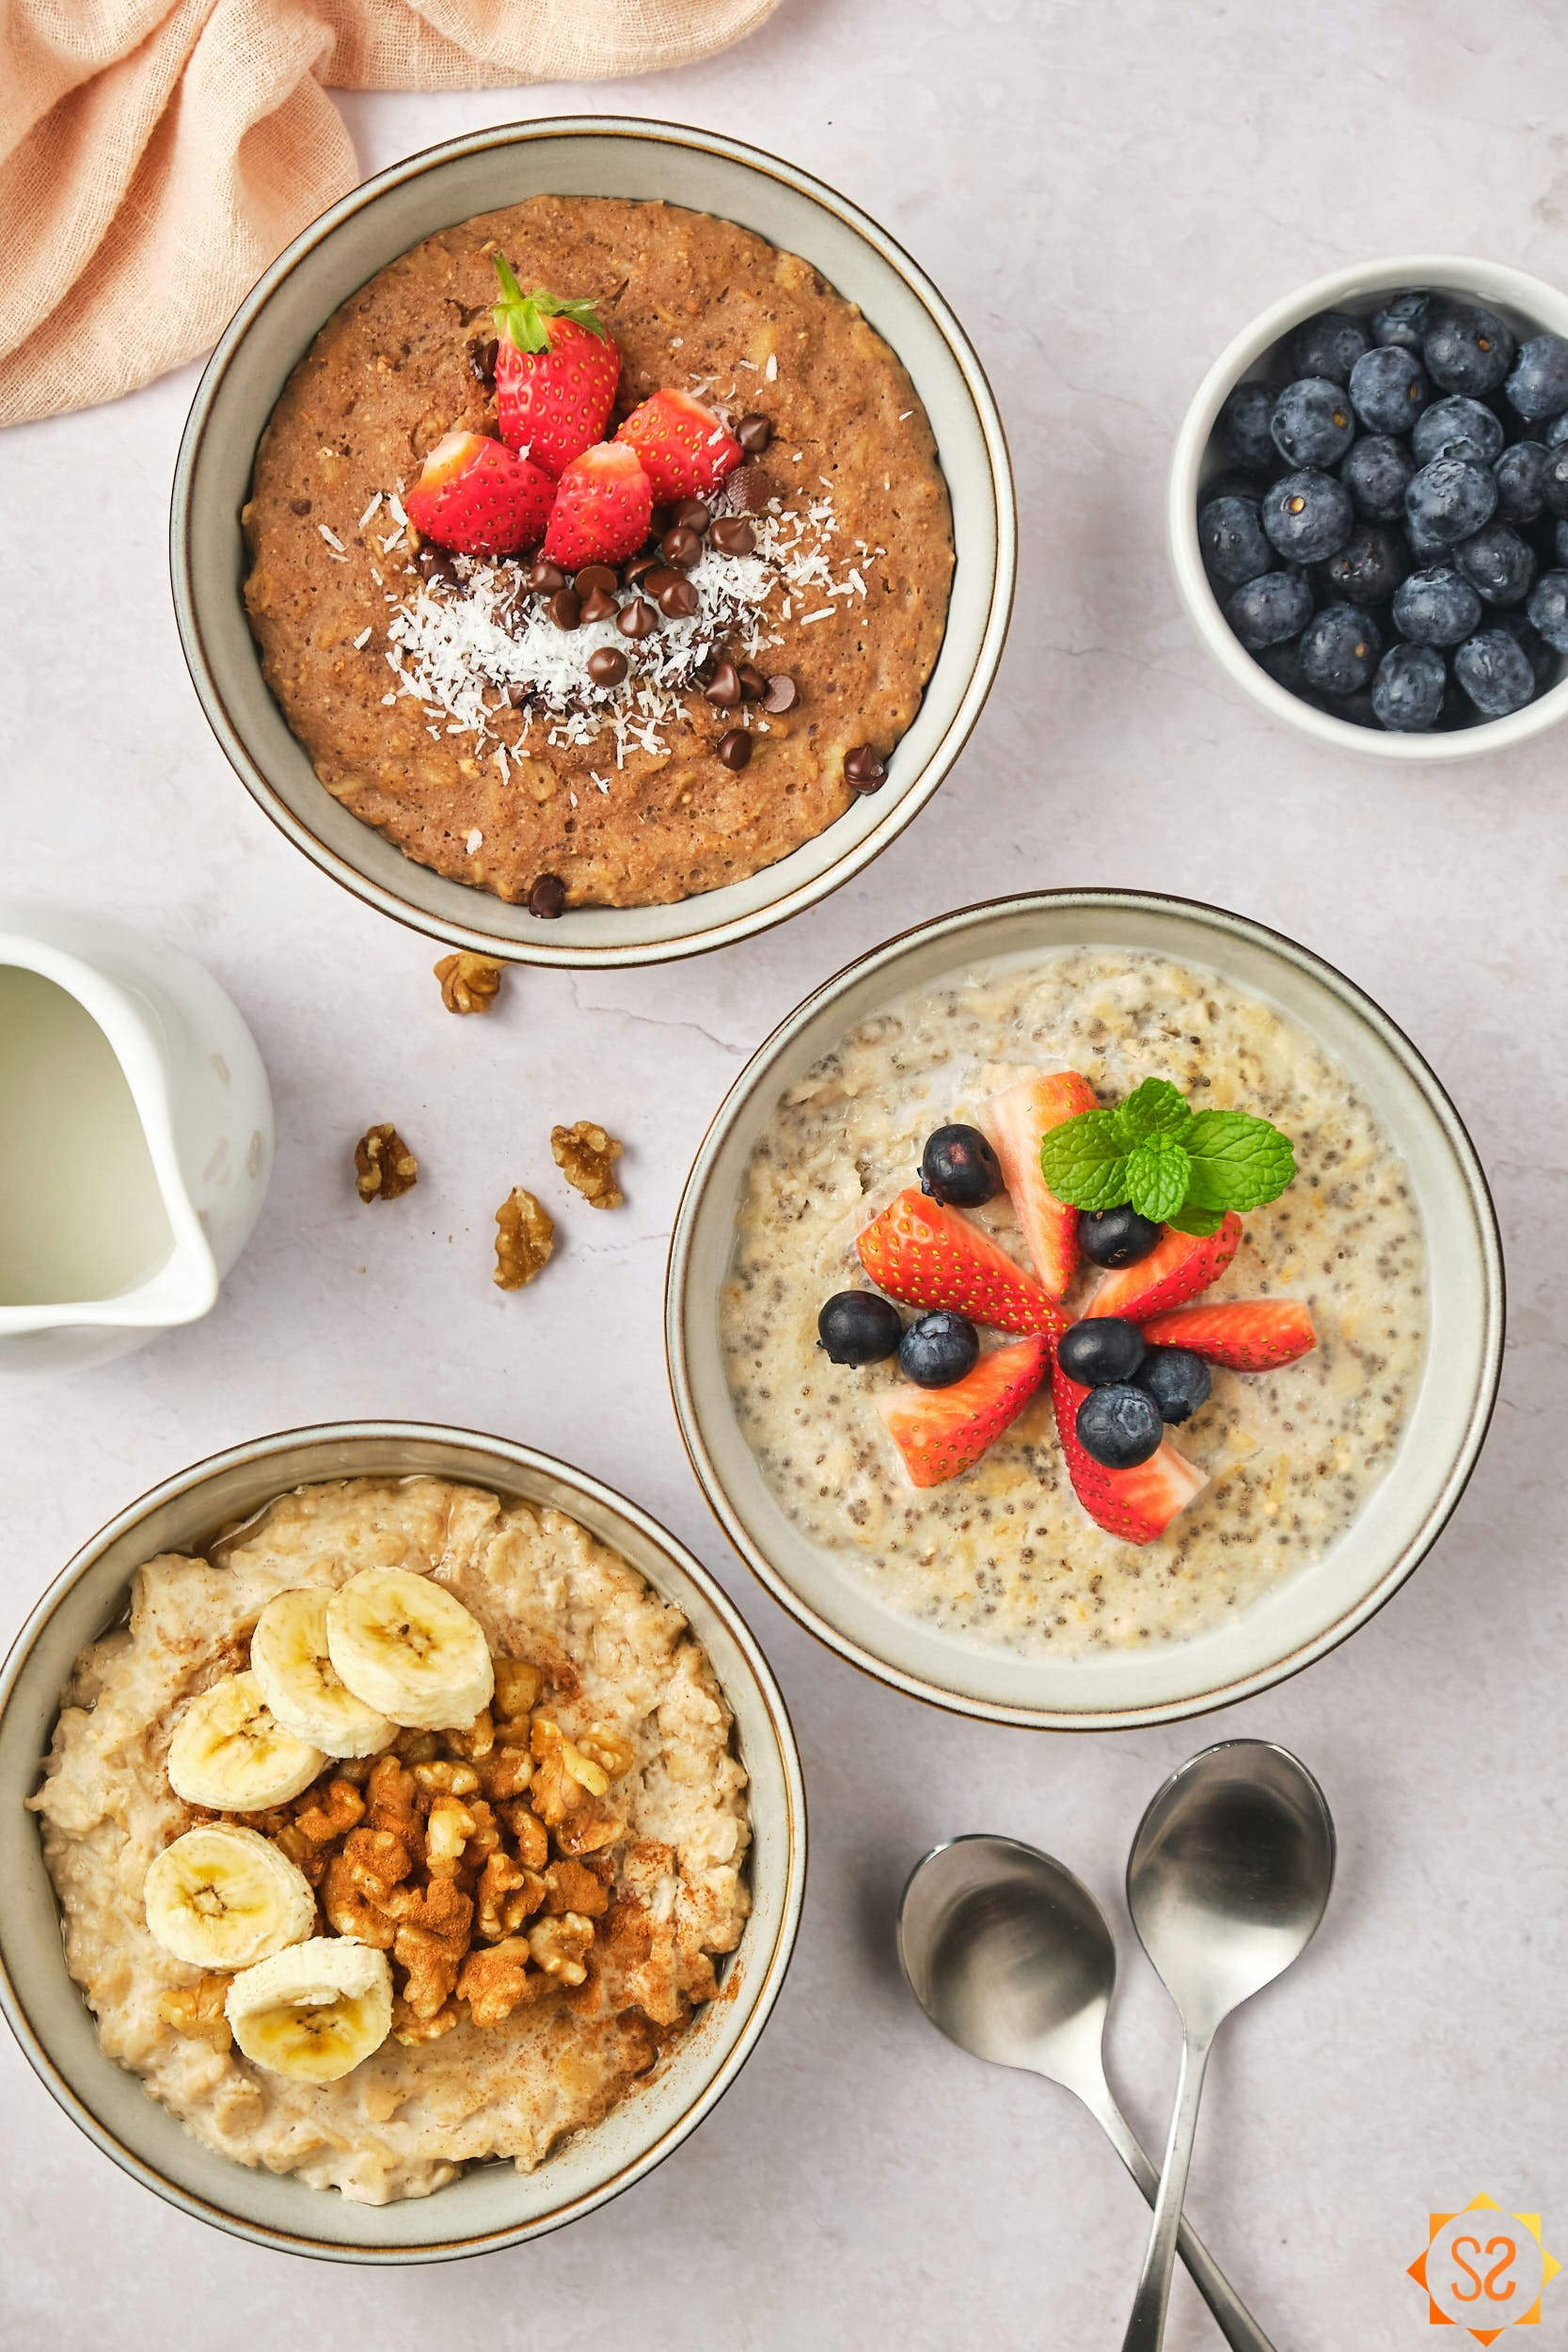 Three flavors of protein oatmeal (chocolate with coconut and strawberry, chia with strawberry and blueberry, and banana walnut peanut butter).